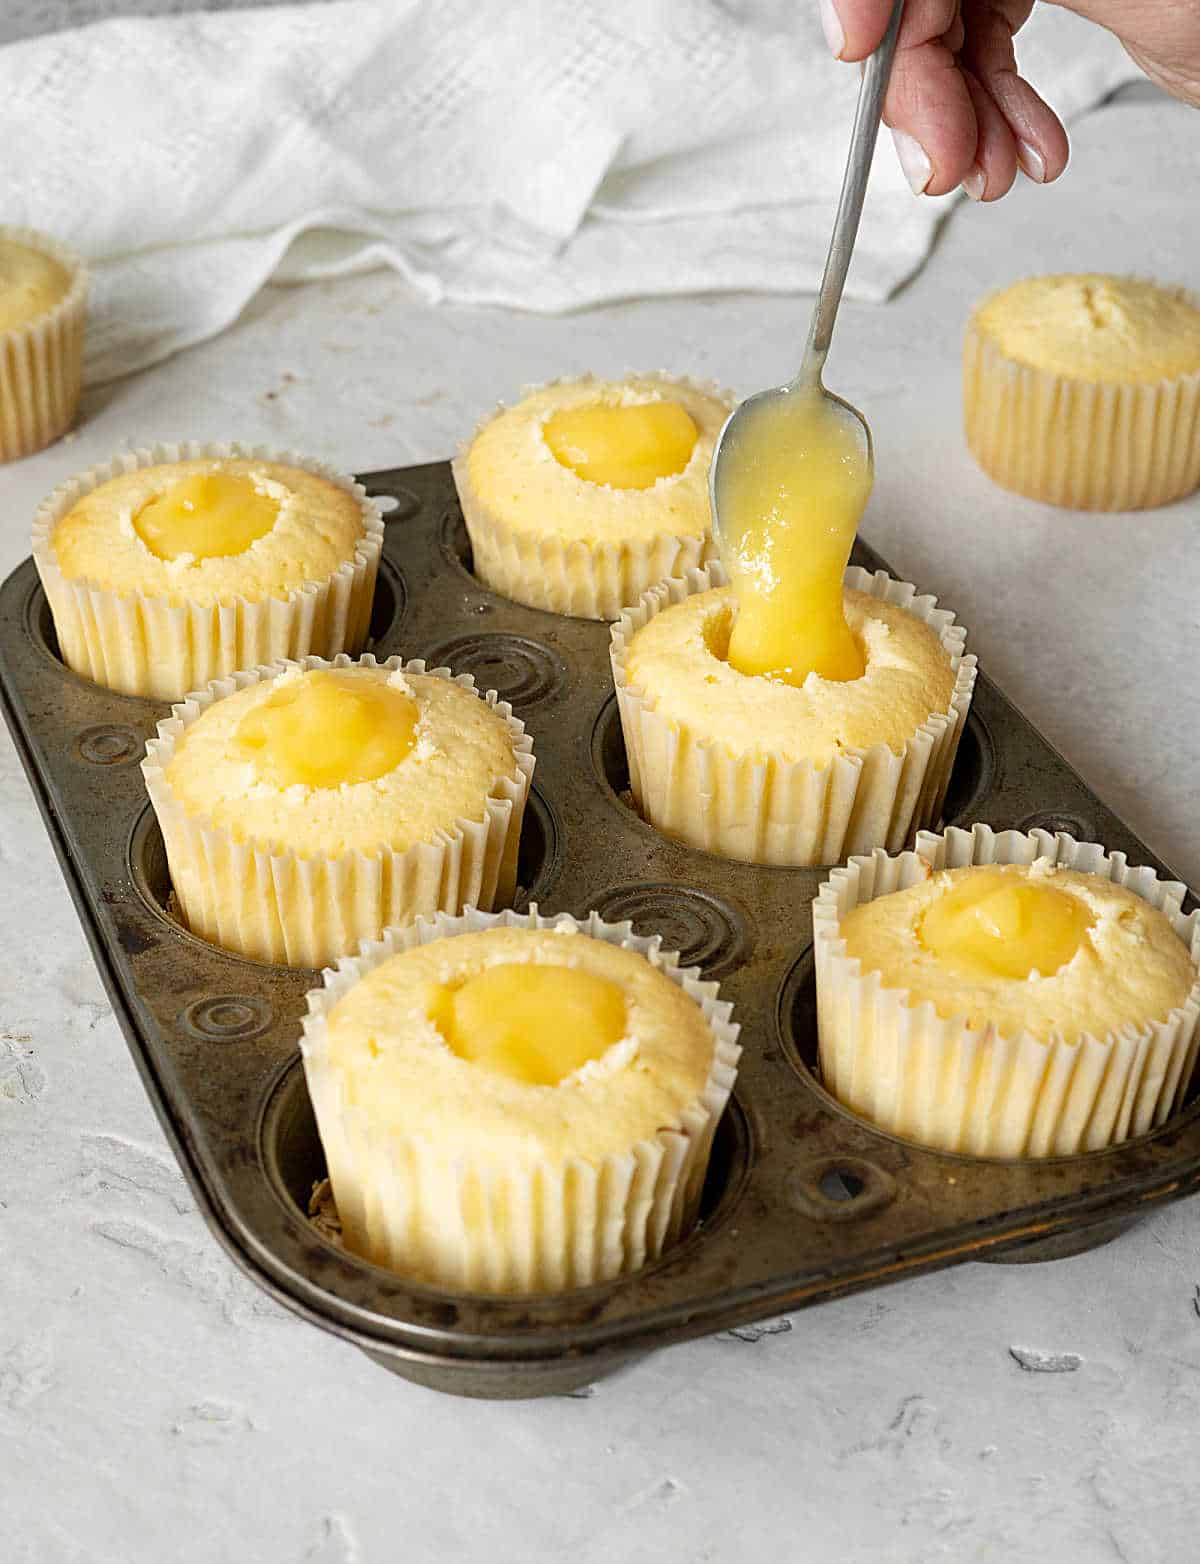 Spooning lemon curd in the center of lemon cupcakes in liners on a metal tin. Grey surface.